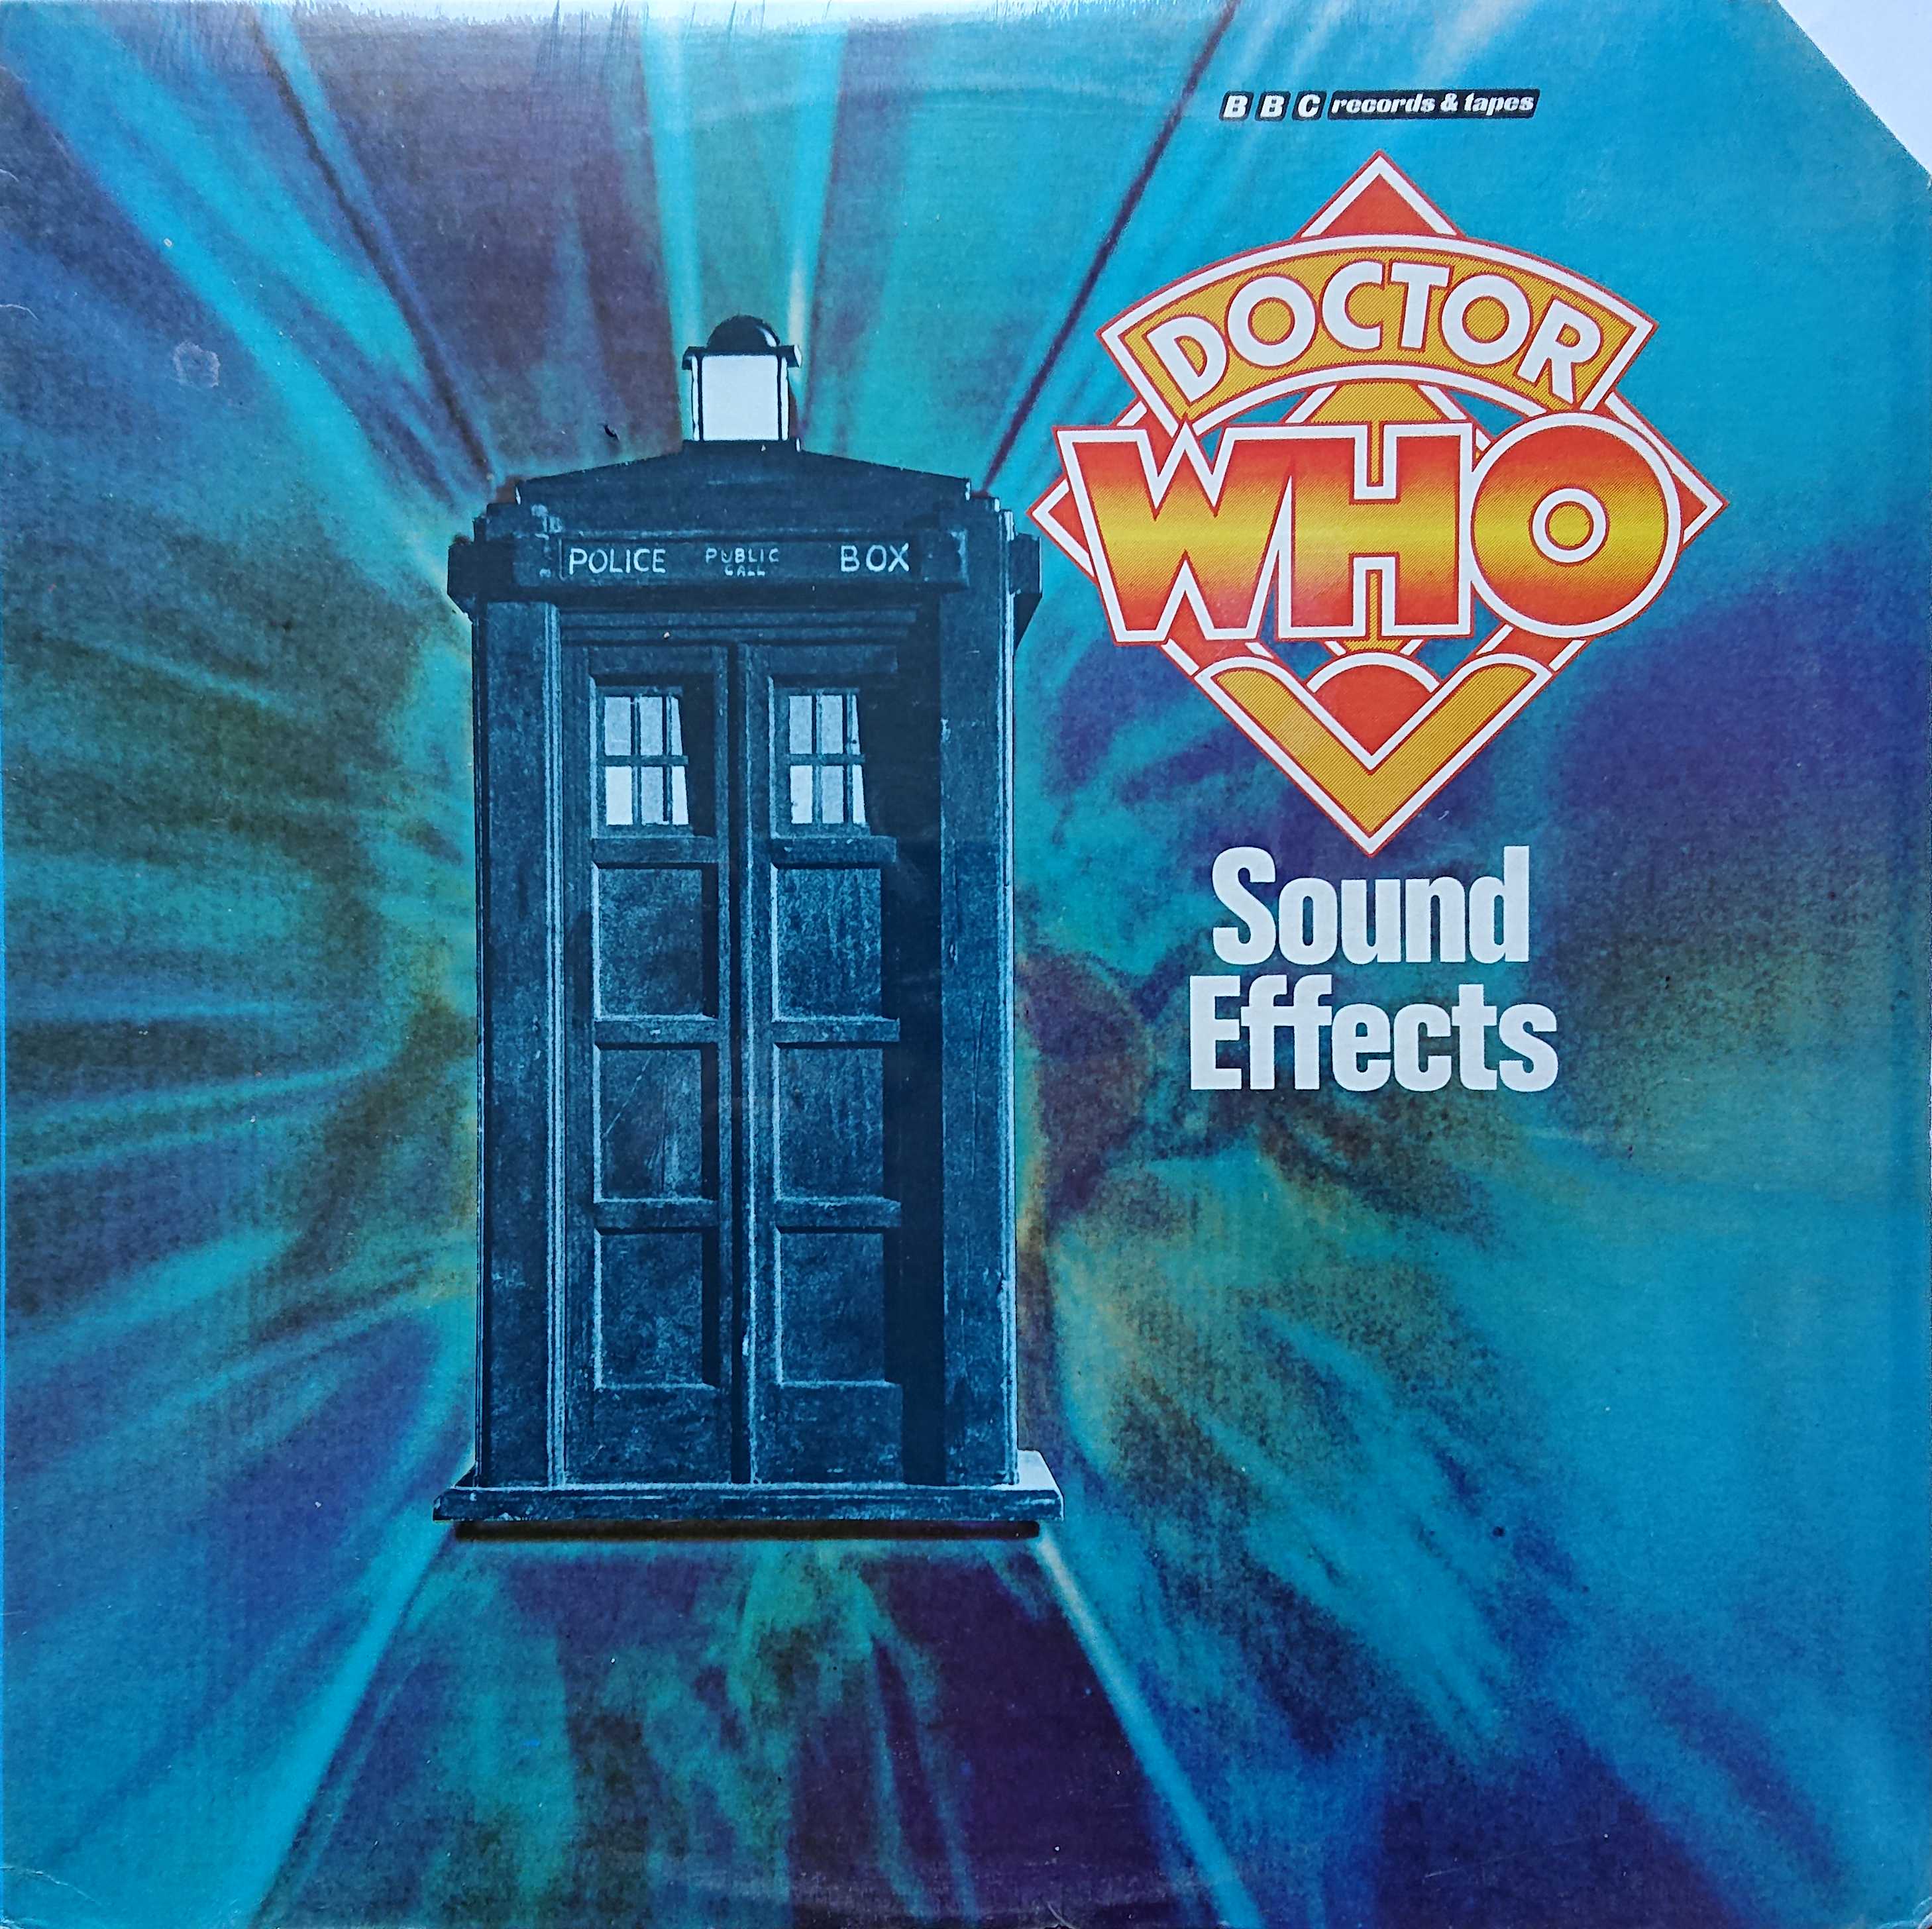 Picture of Doctor Who sound effects by artist BBC radiophonic workshop from the BBC albums - Records and Tapes library